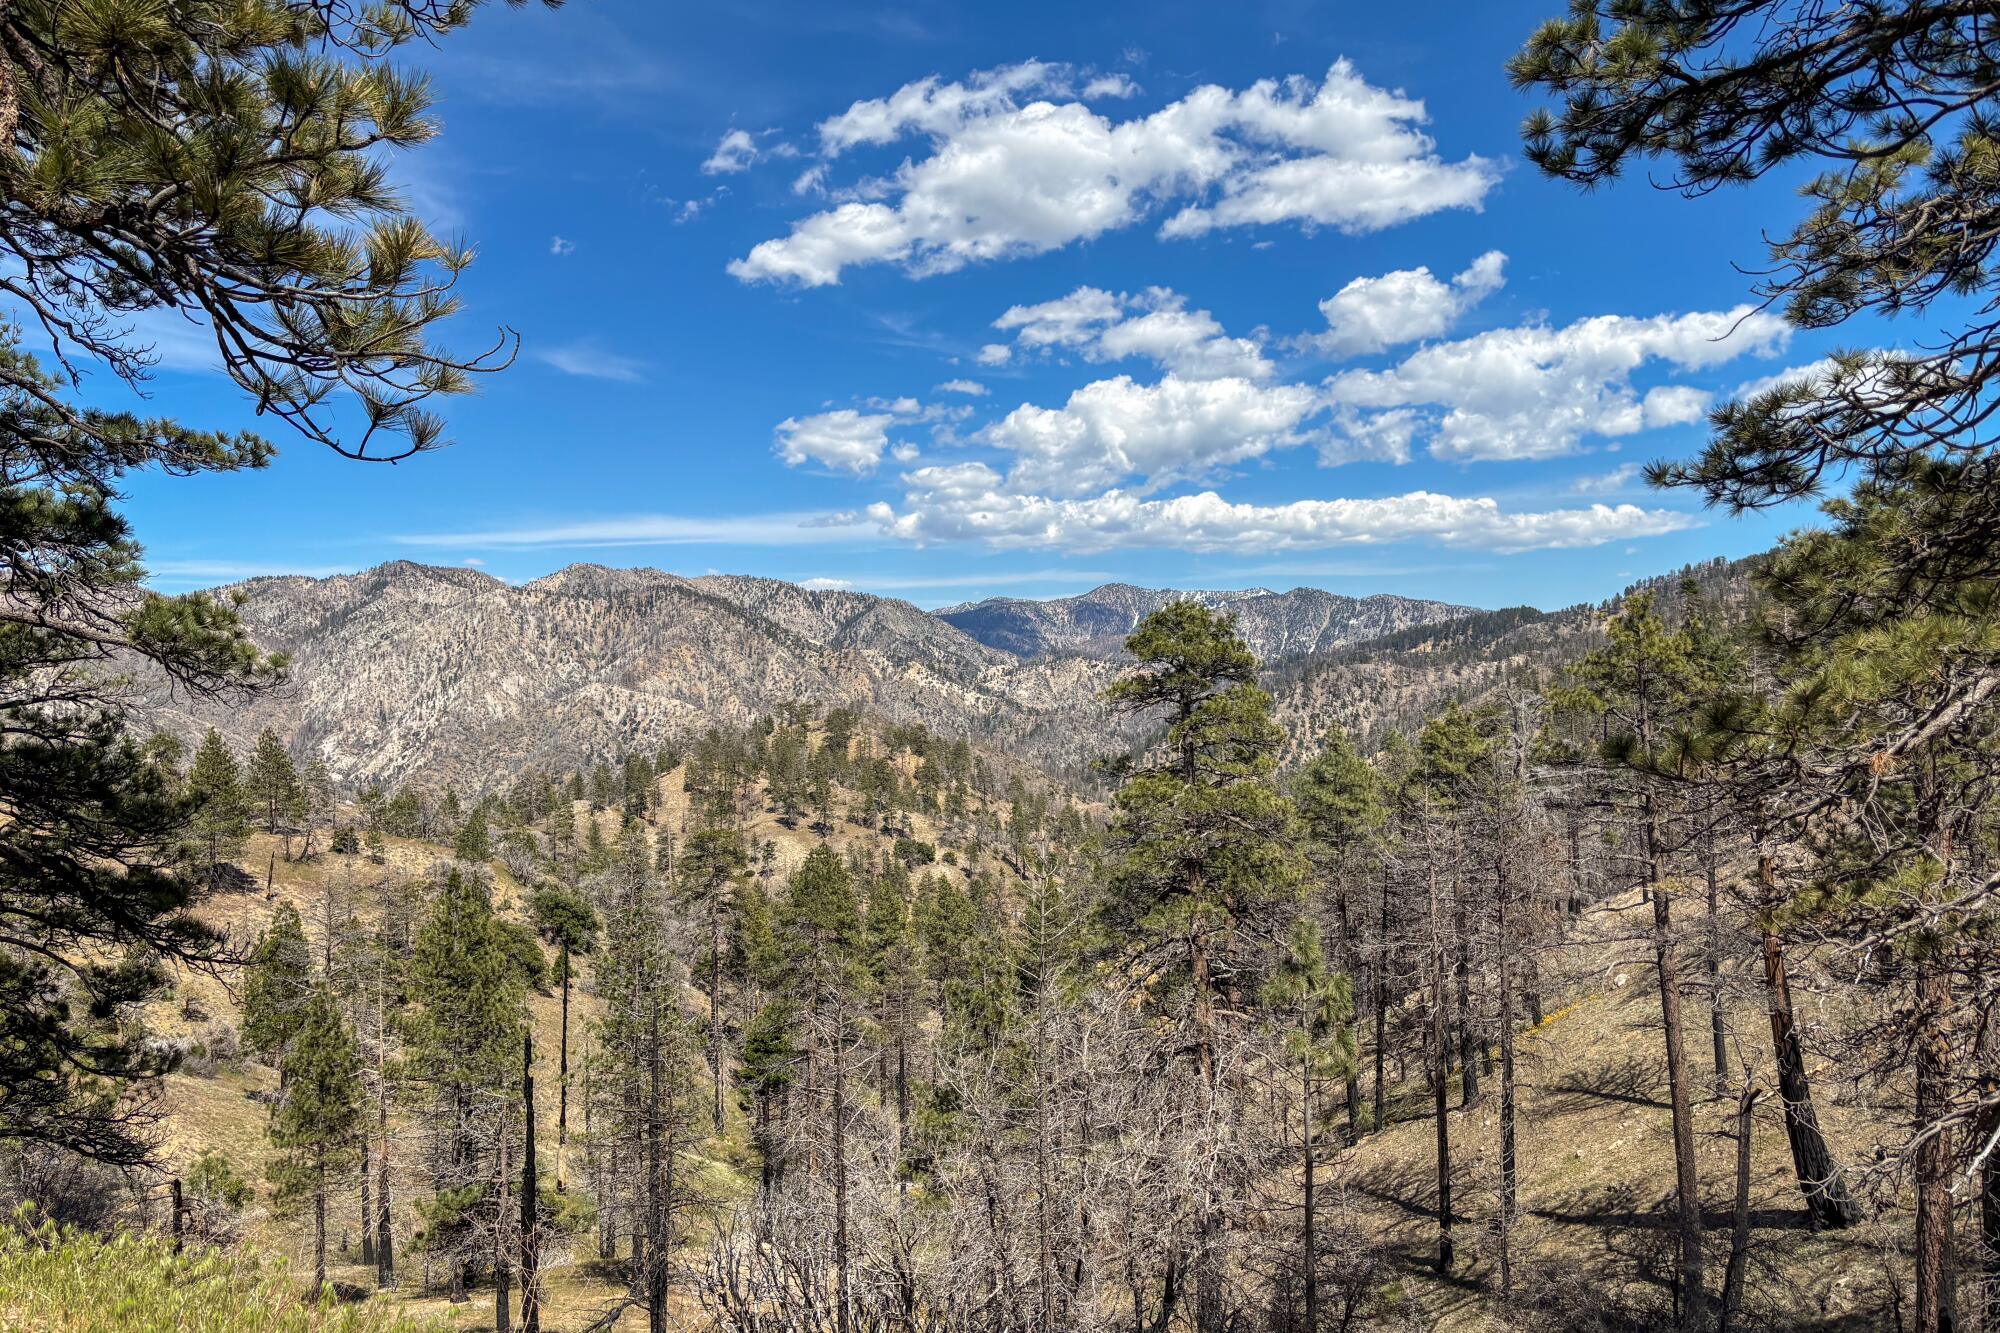 A sweeping view of pine trees and farther in the distance, a mountain ridge still visibly burned from the Bobcat fire